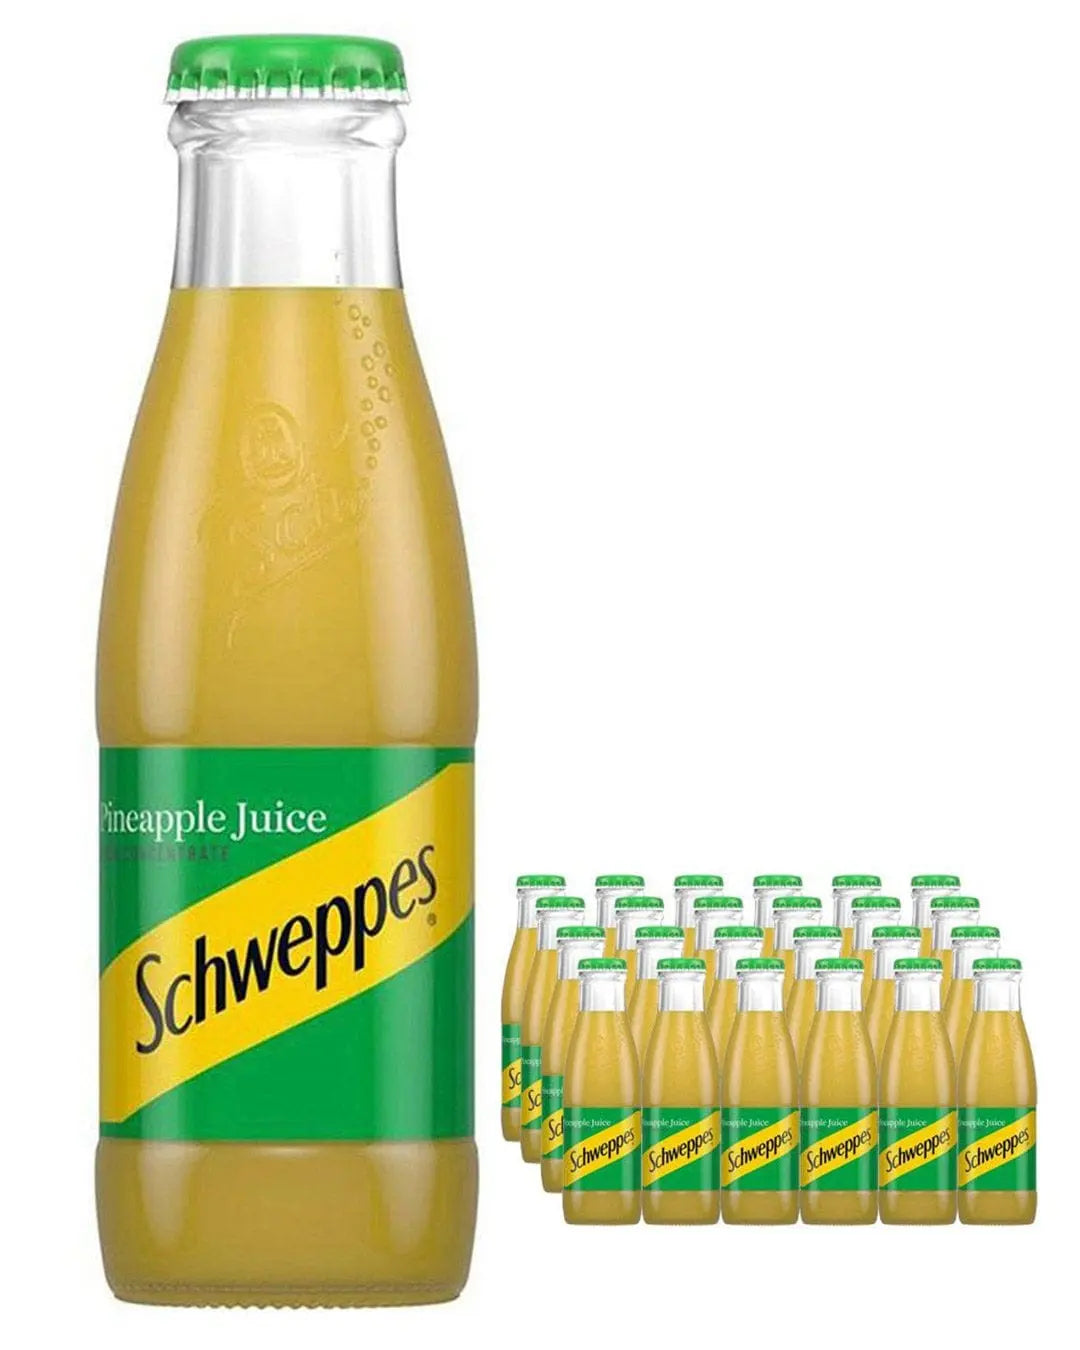 Schweppes Pineapple Juice Glass Bottle Multipack, 24 x 125 ml Soft Drinks & Mixers